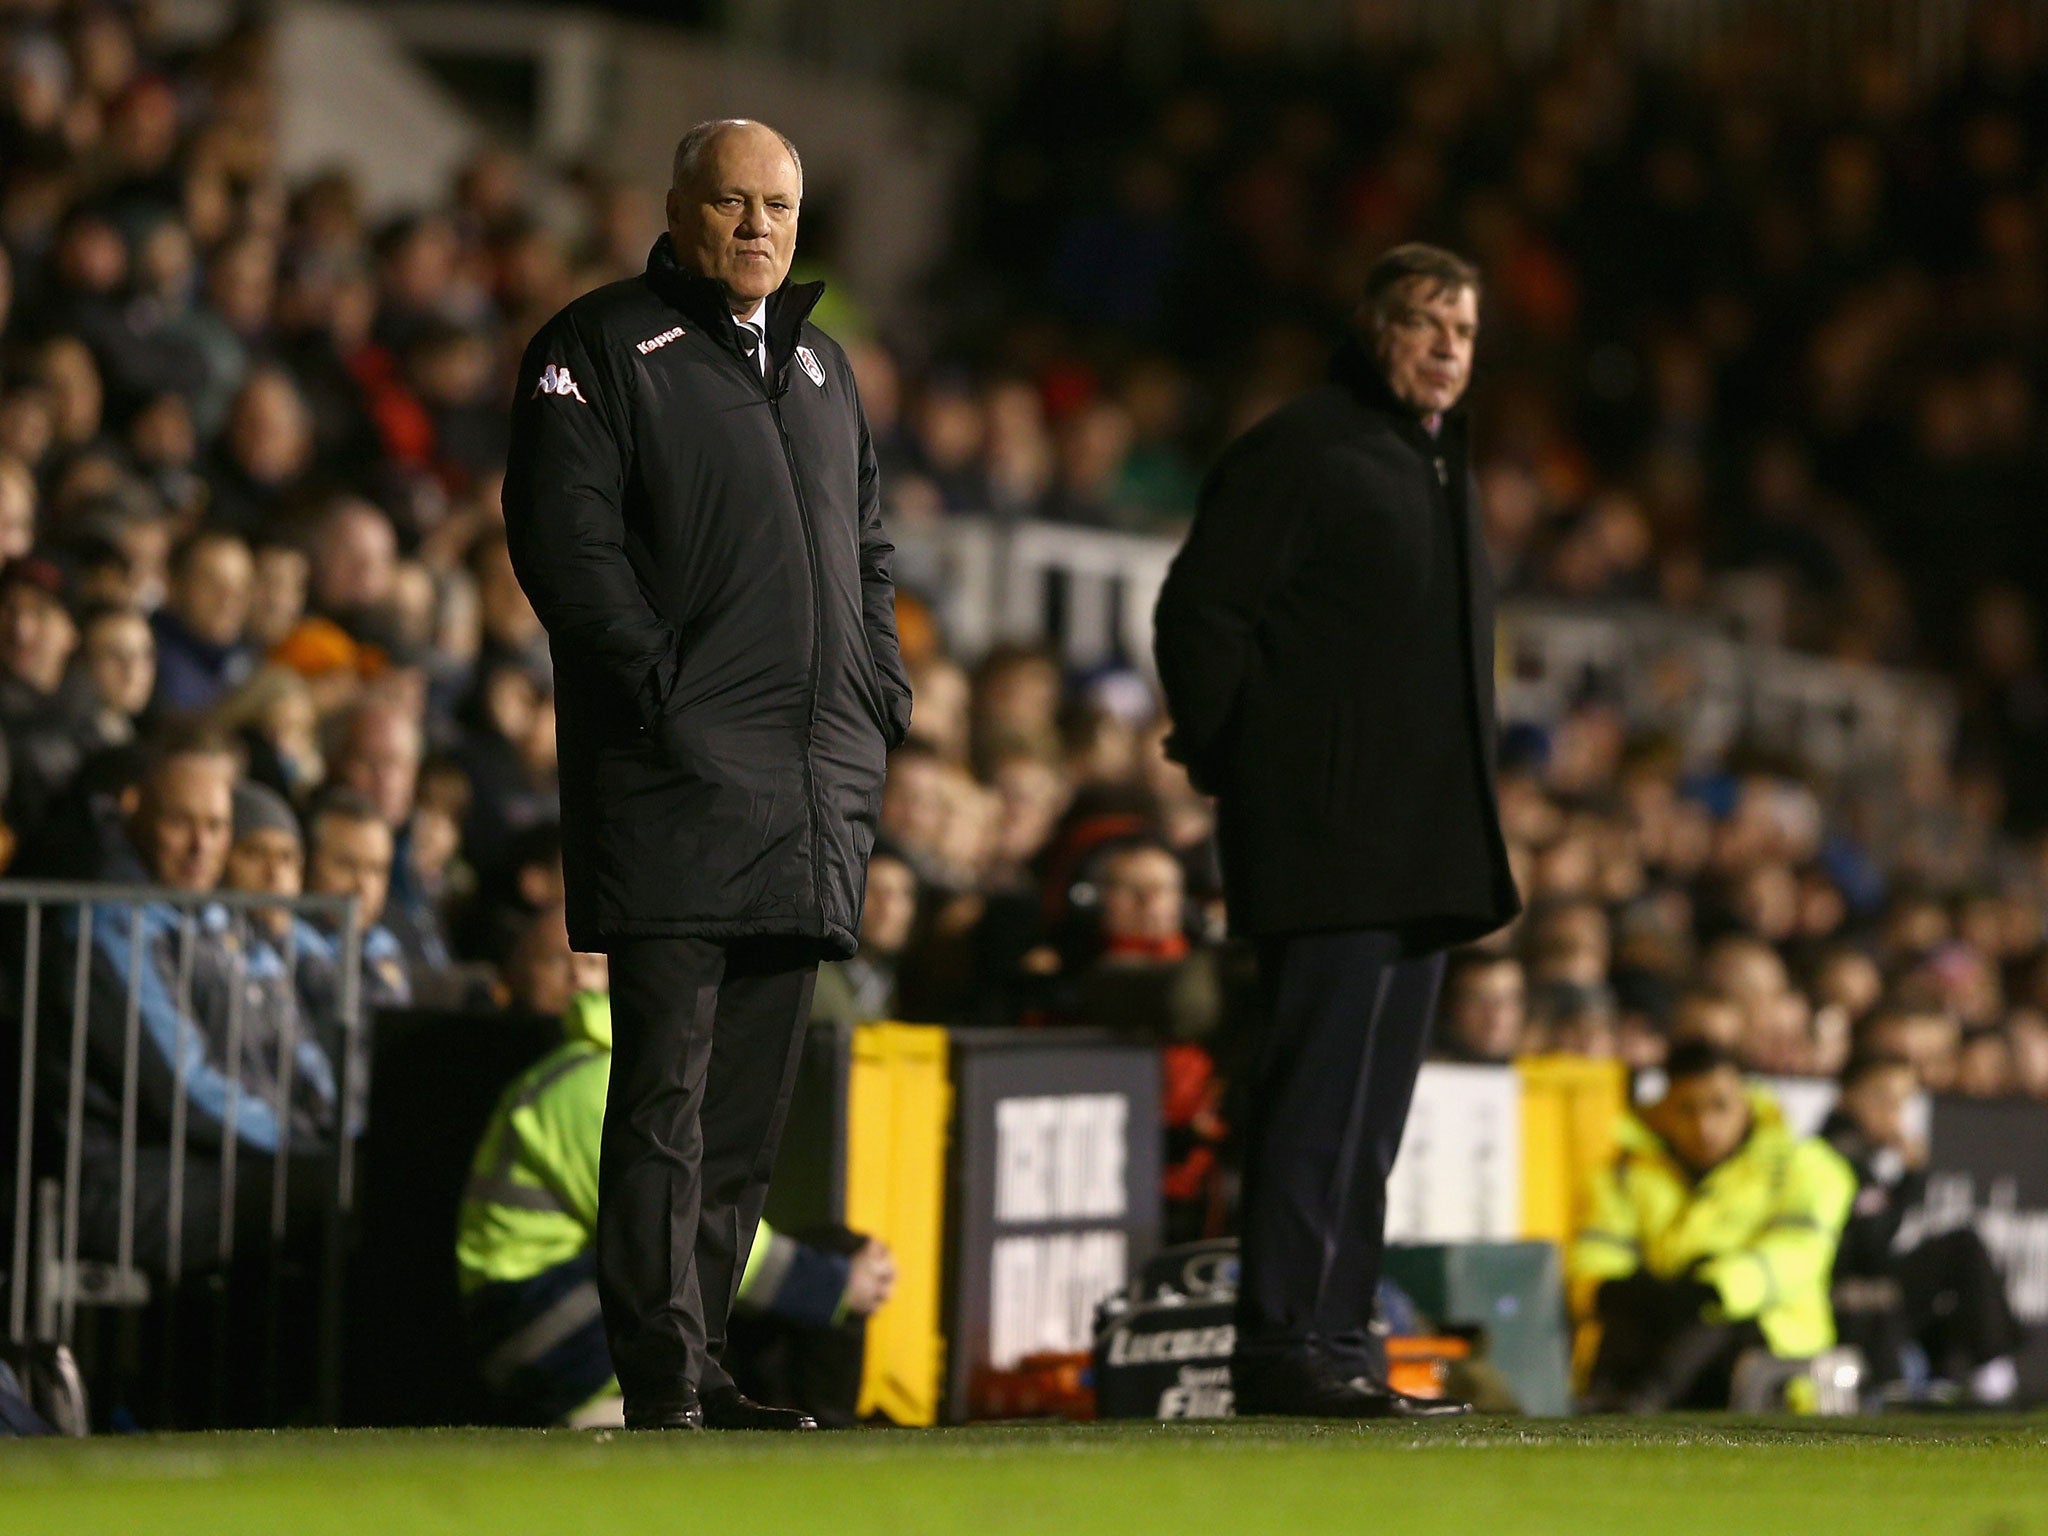 Martin Jol (left) and Sam Allardyce both know defeat at Upton Park today could result in the sack